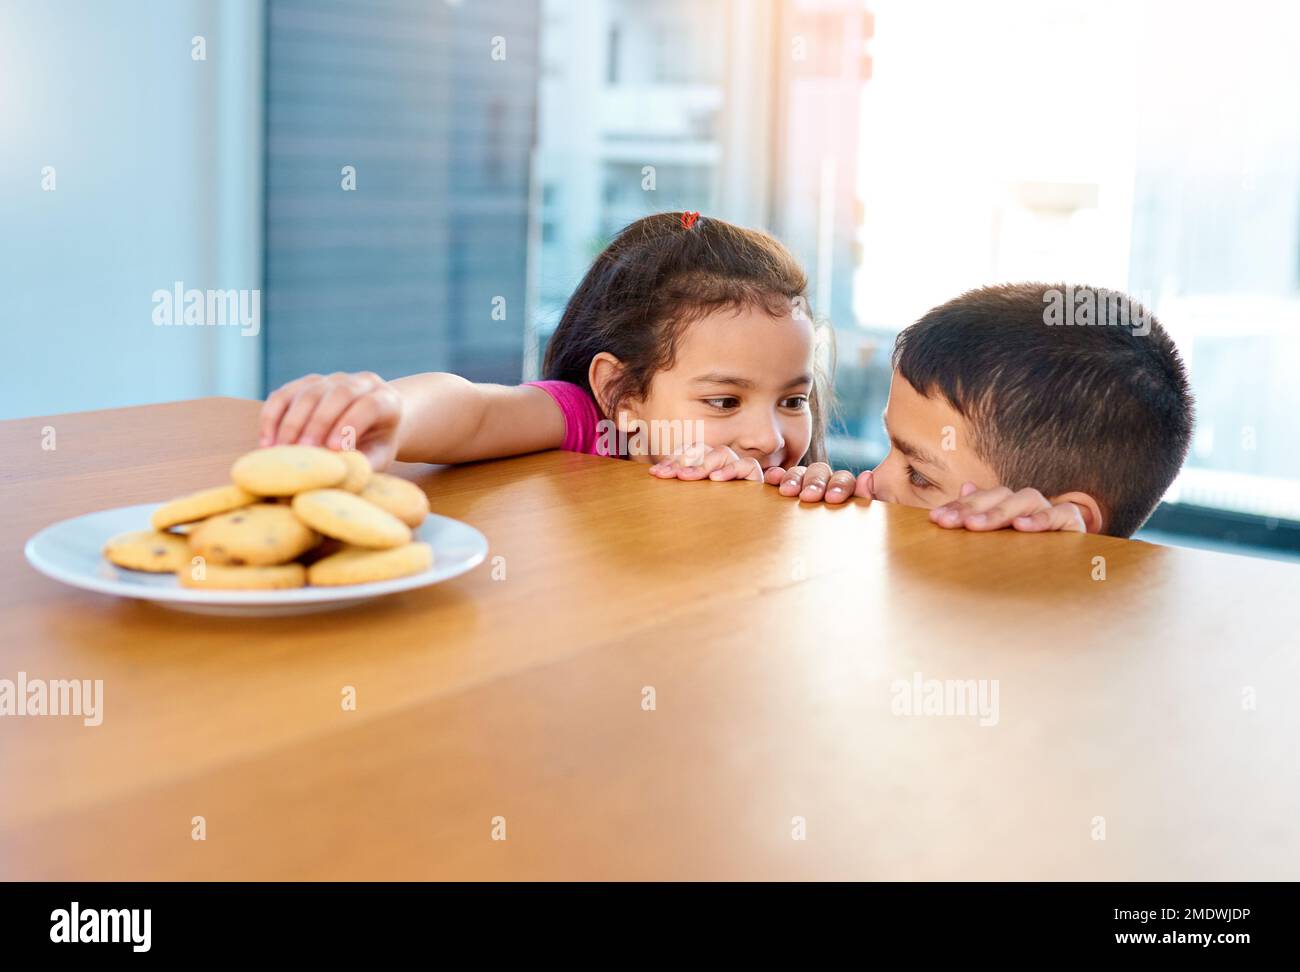 Dont tell anyone about this okay. two mischievous young children stealing cookies on the kitchen table at home. Stock Photo